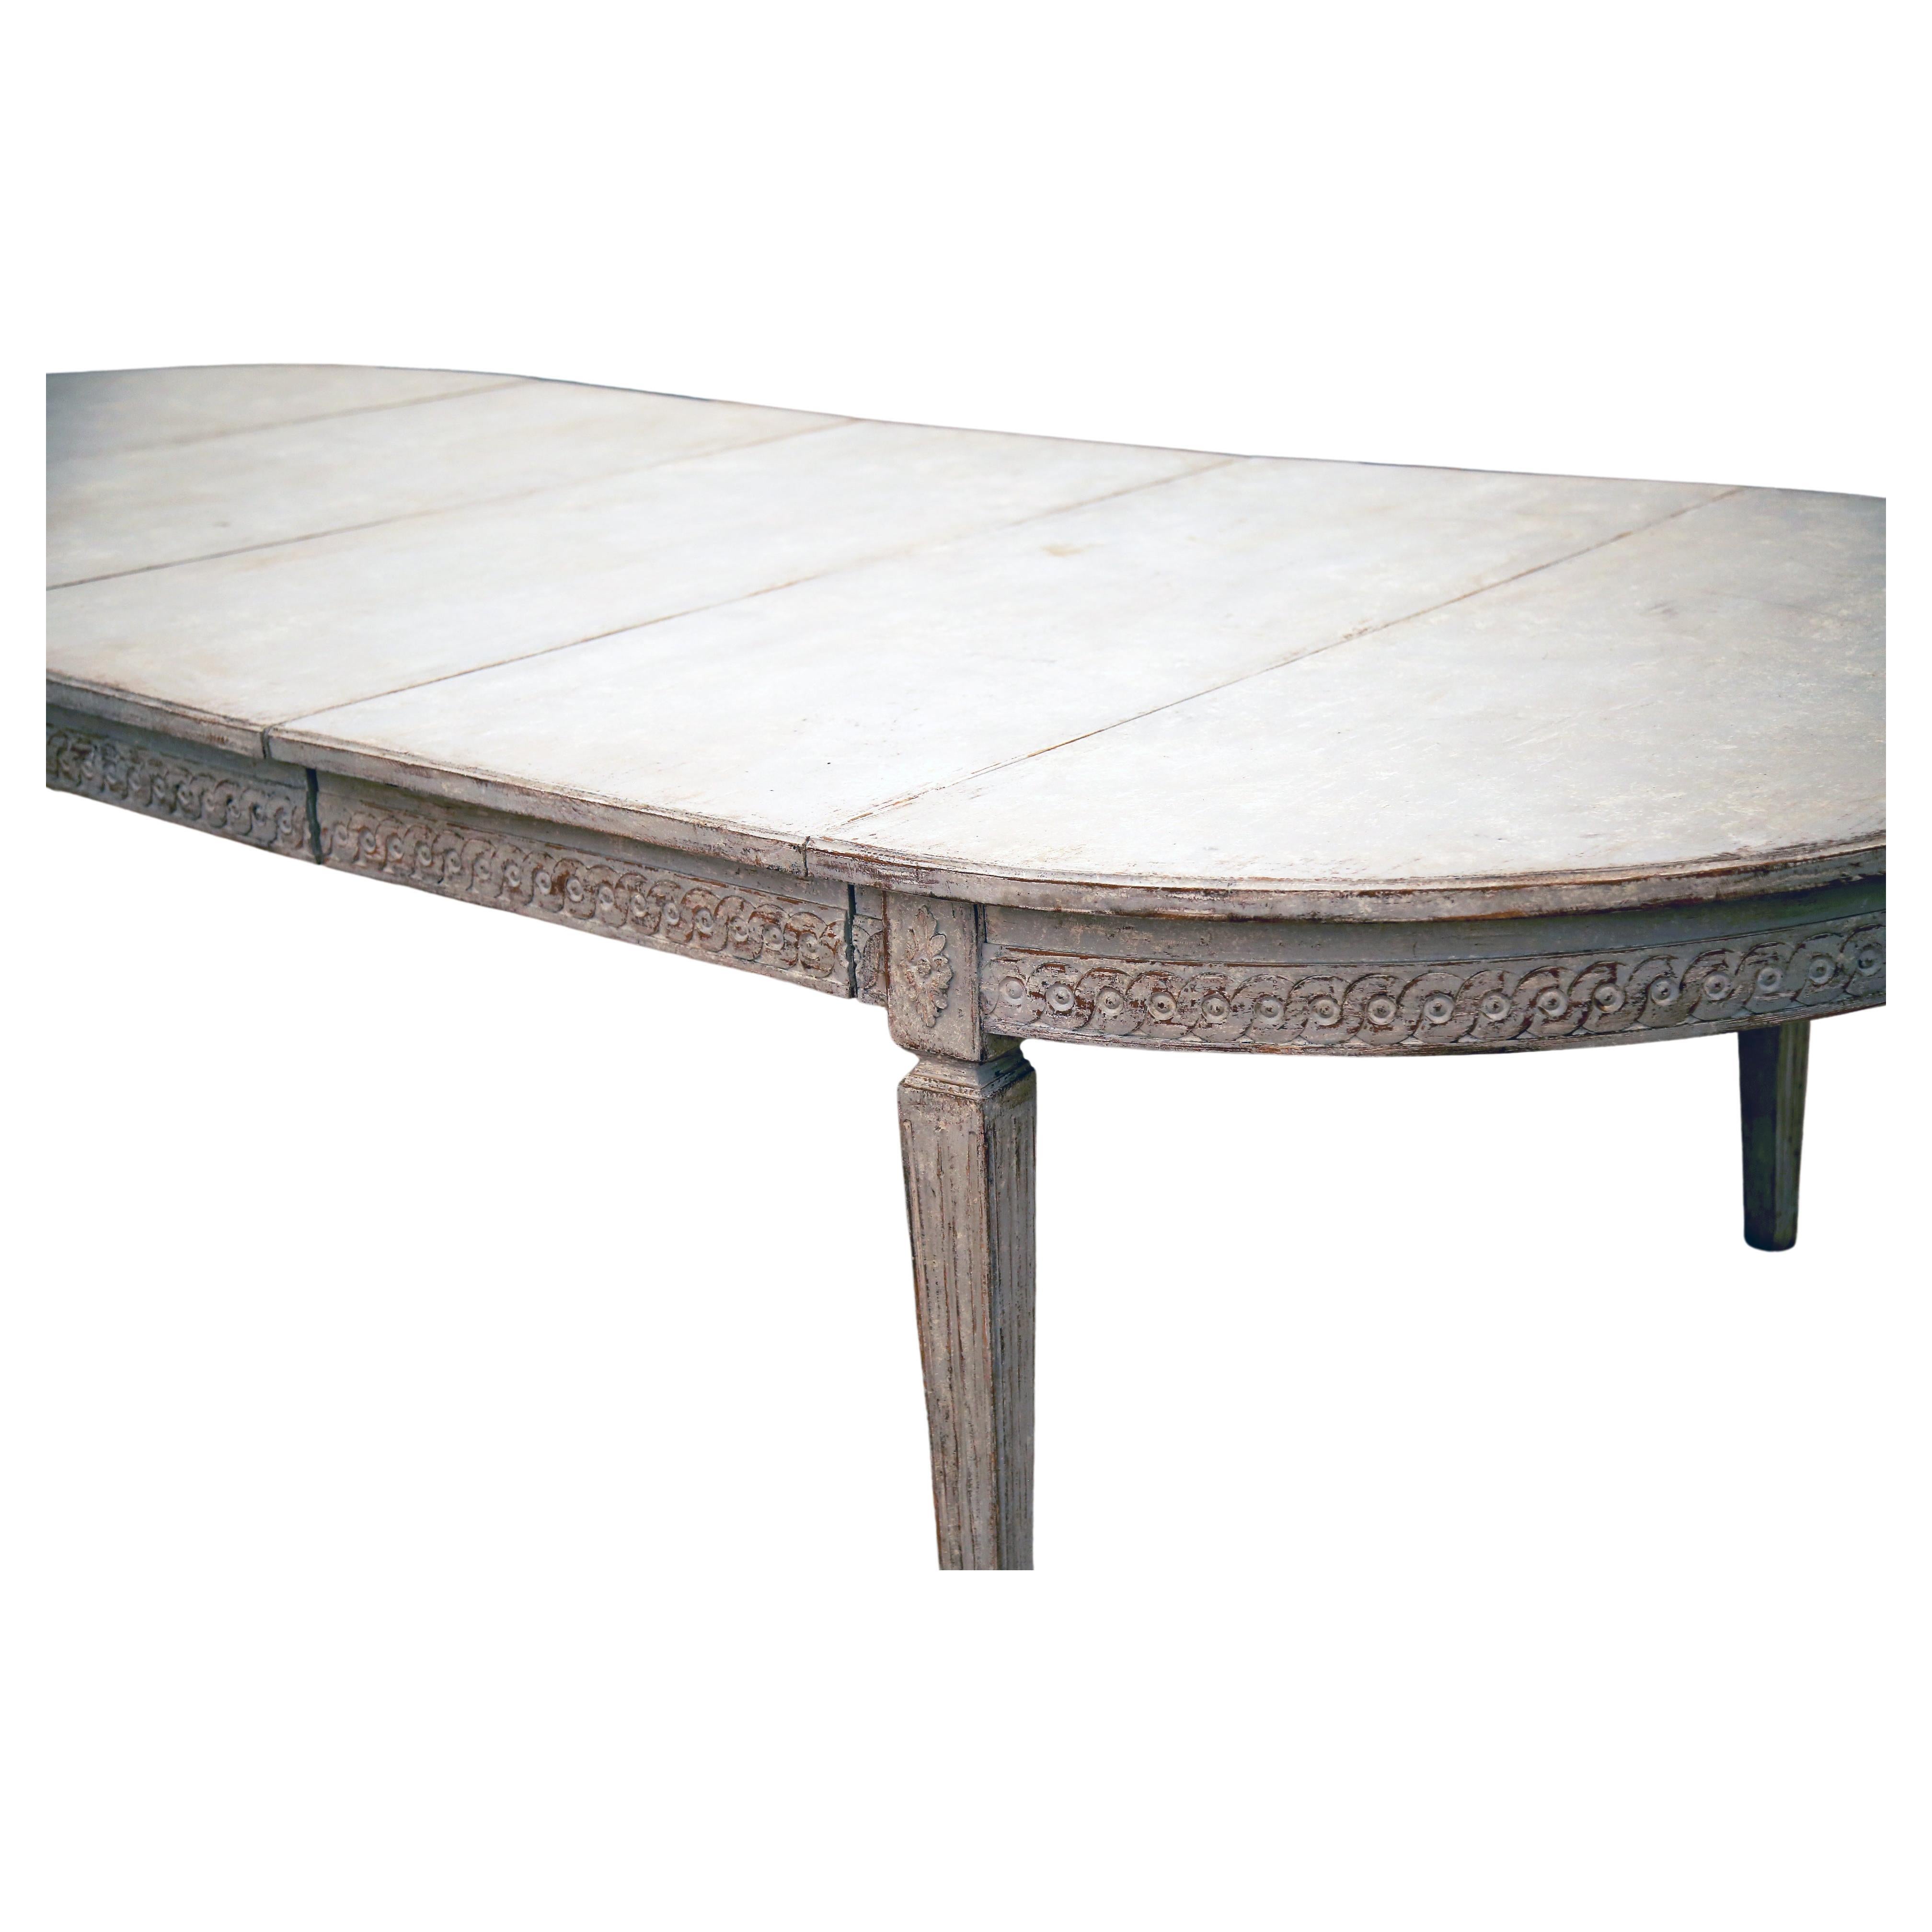 A light-grey and white color palette and finish adorns this stunning and very special antique Swedish Gustavian extendable dining room table. This table is made of hand crafted Pinewood with three leaves that can be adjusted to fit all 3, 2, 1 or